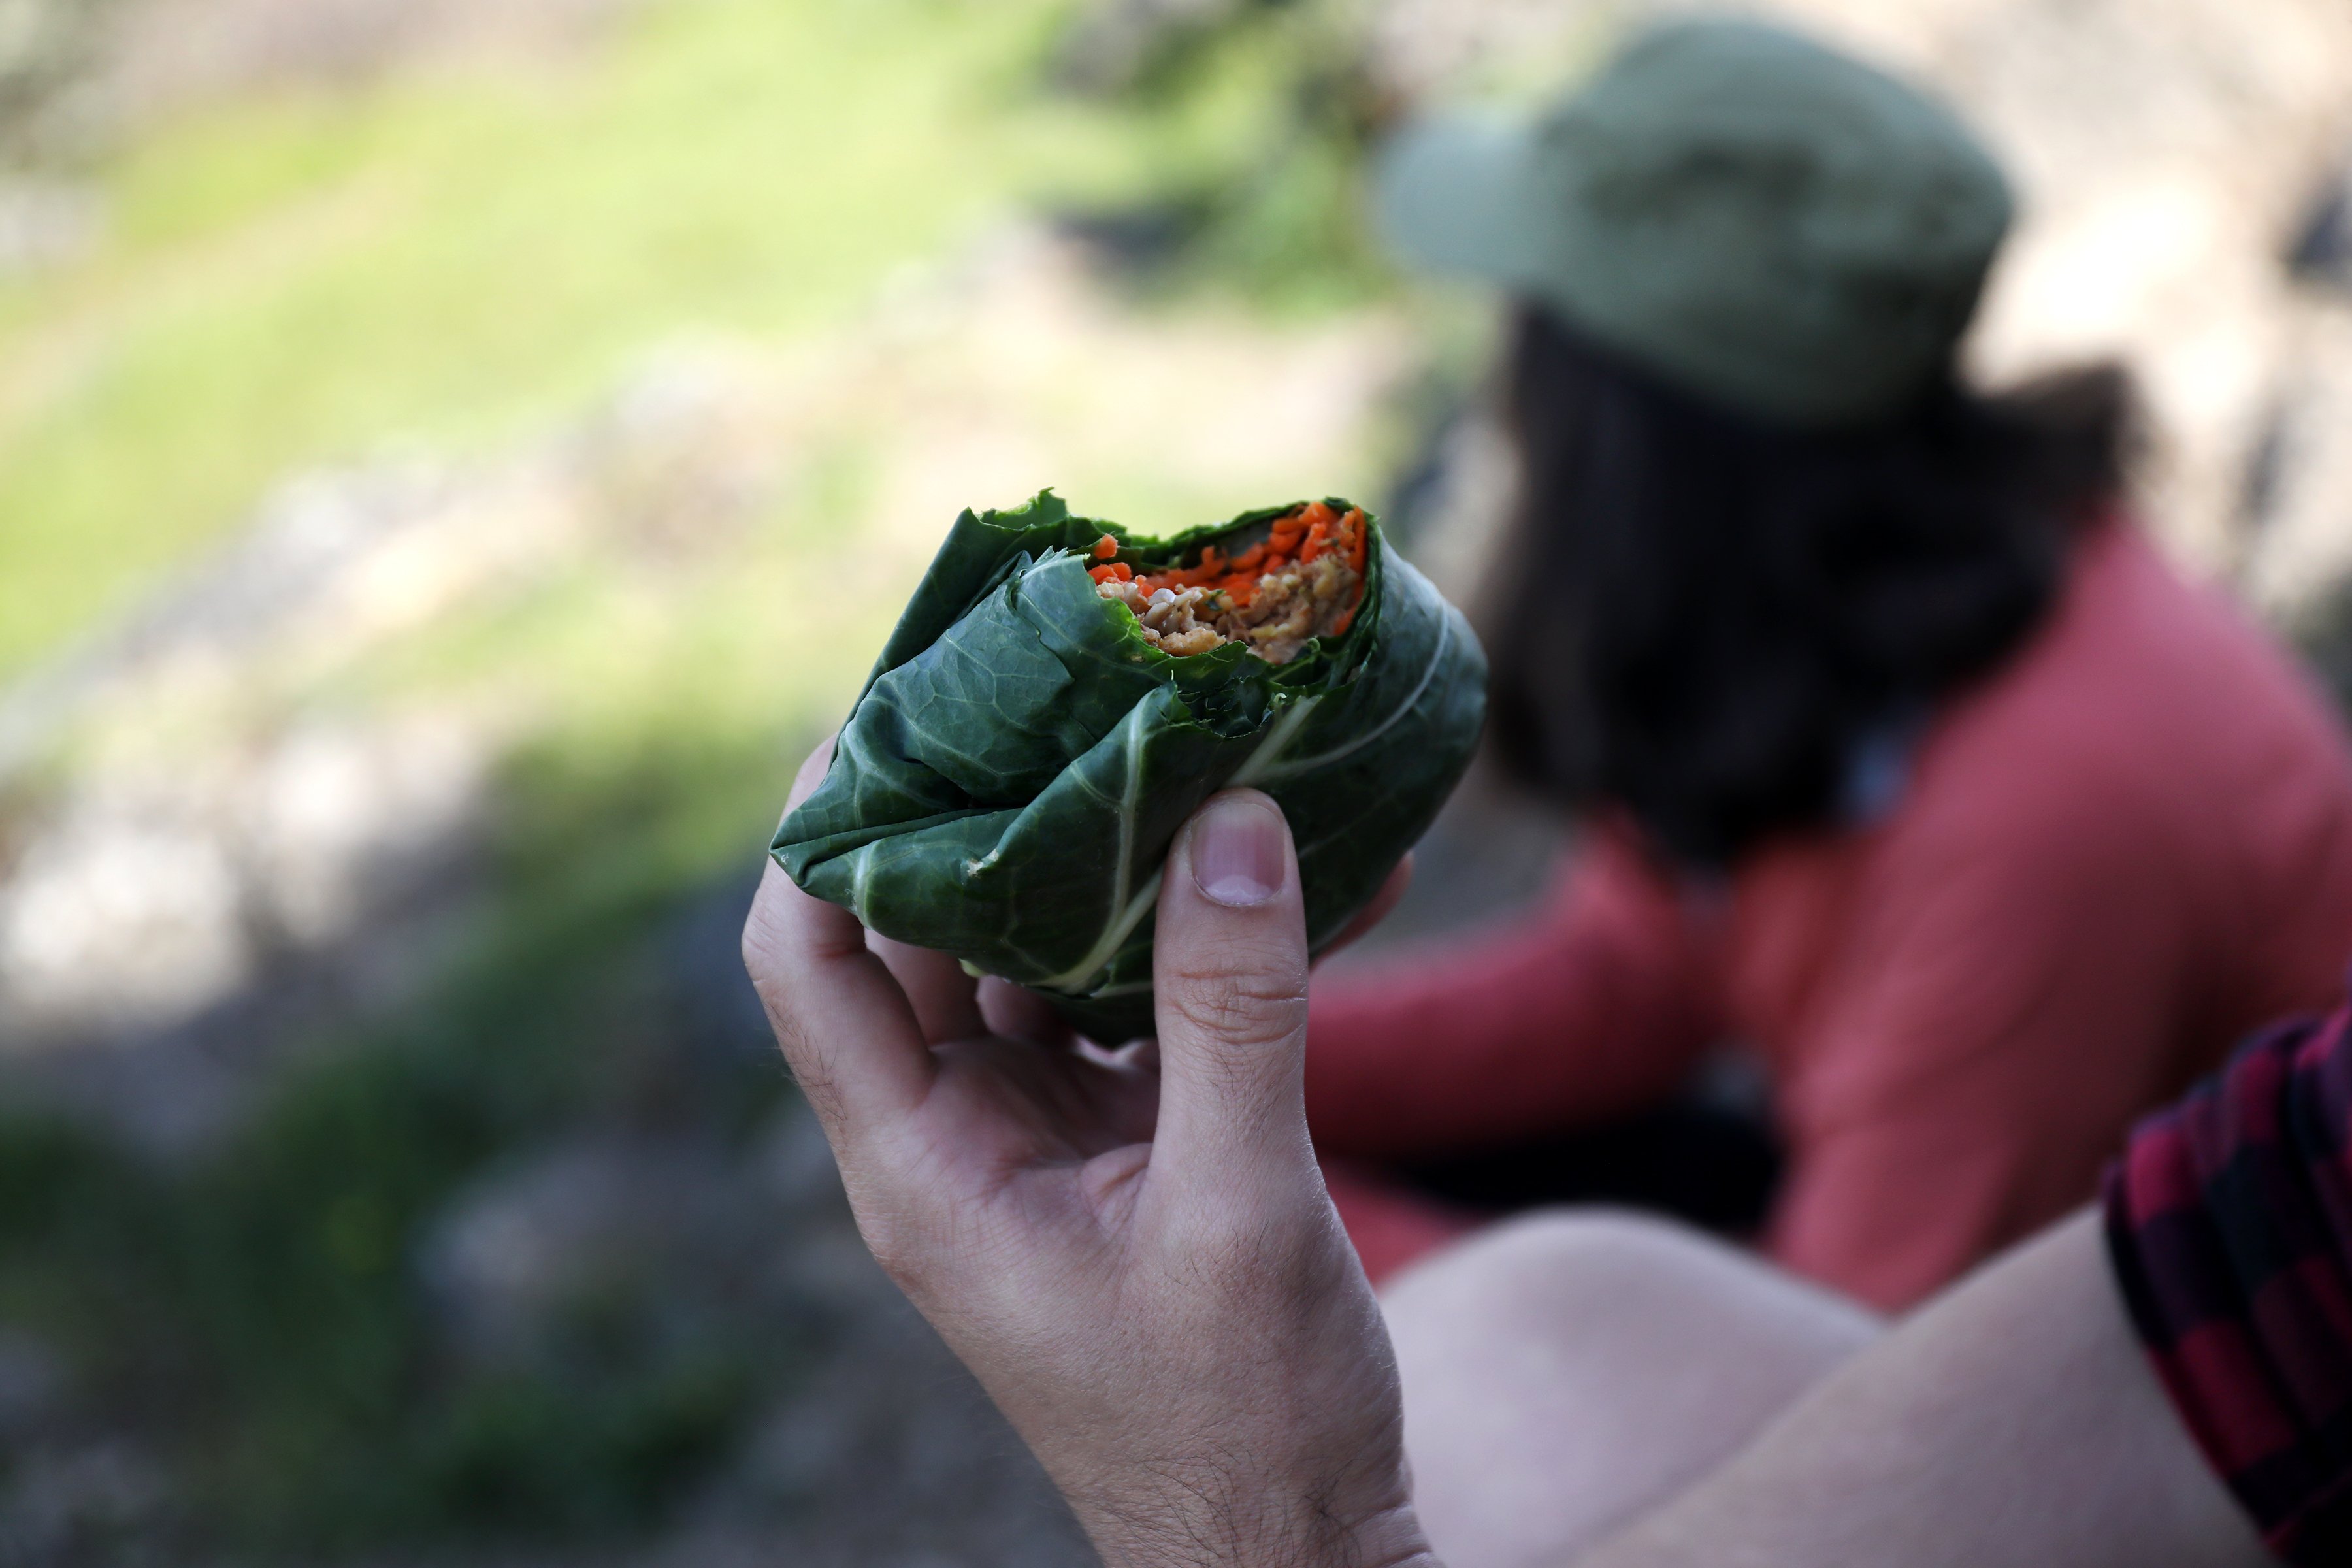 Hikers enjoying a vegan falafel wrap after a day of hiking in the Pacific North West. Fresh collard greens, falafel, and vegetables wrapped into a to-go treat.